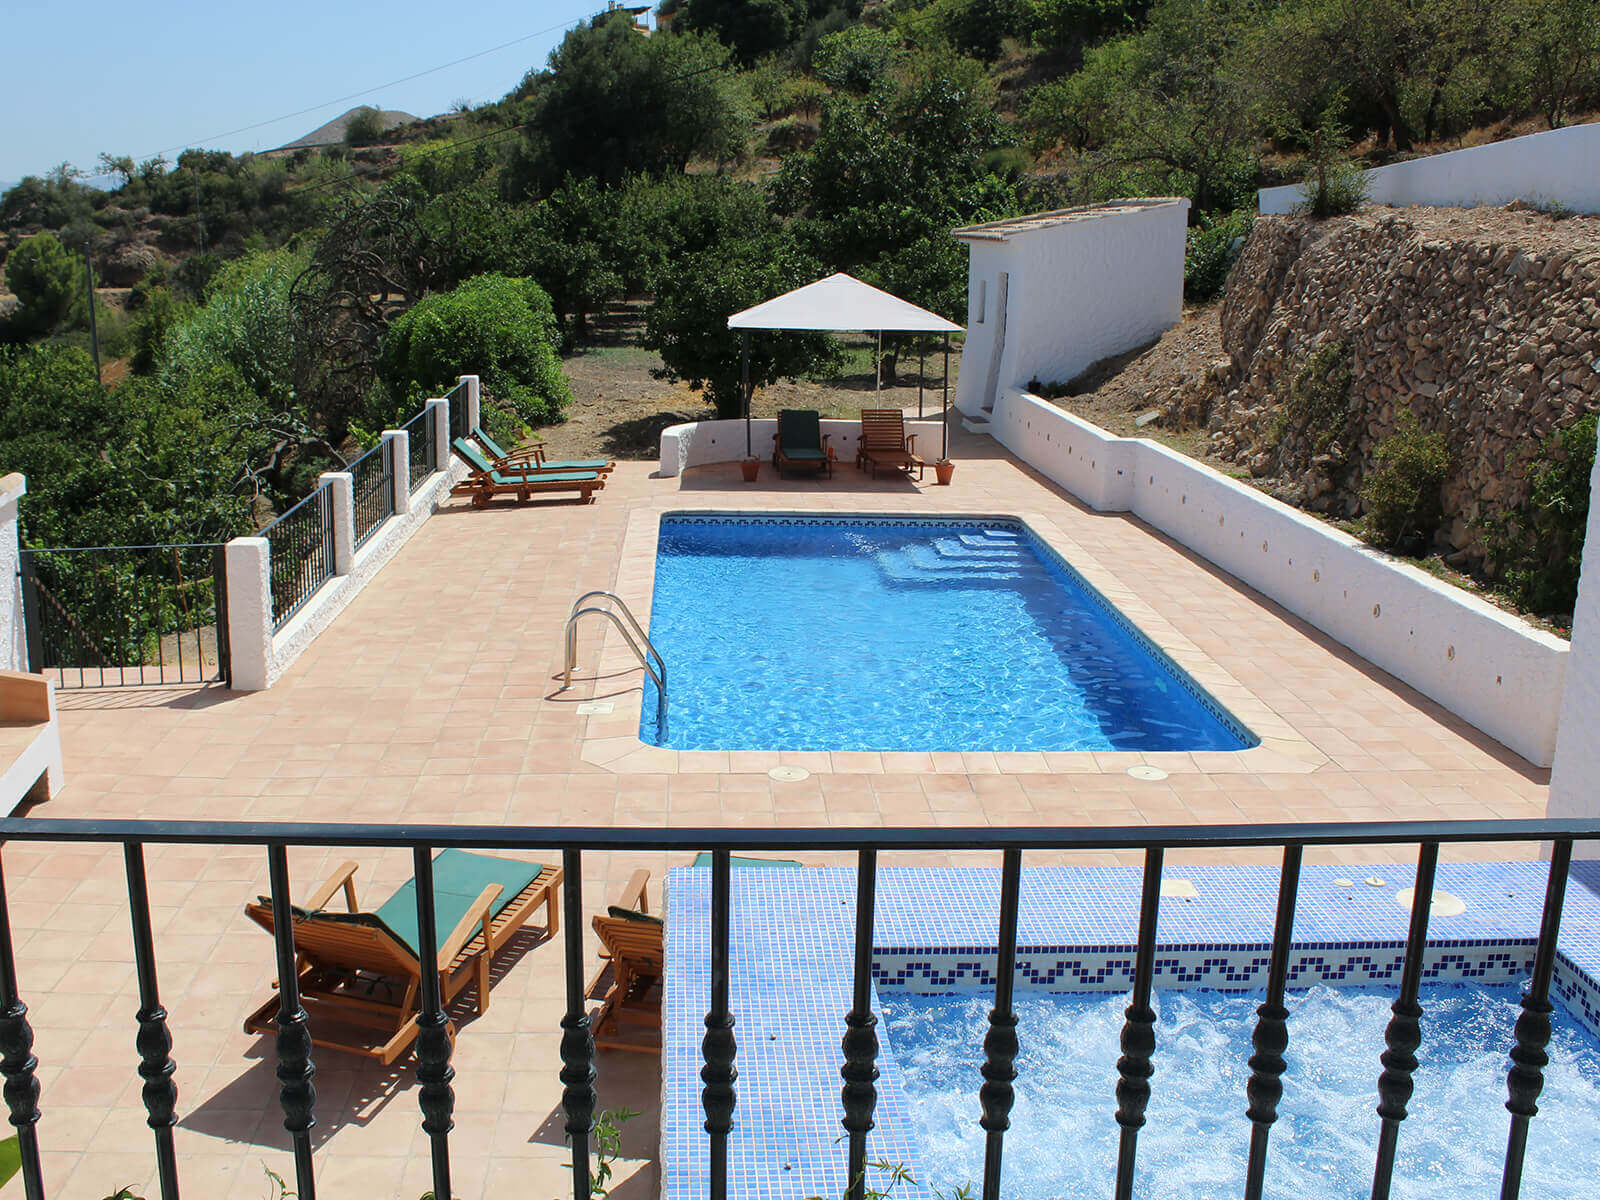 8m x 4m gated, private pool with sun loungers and spectacular views.